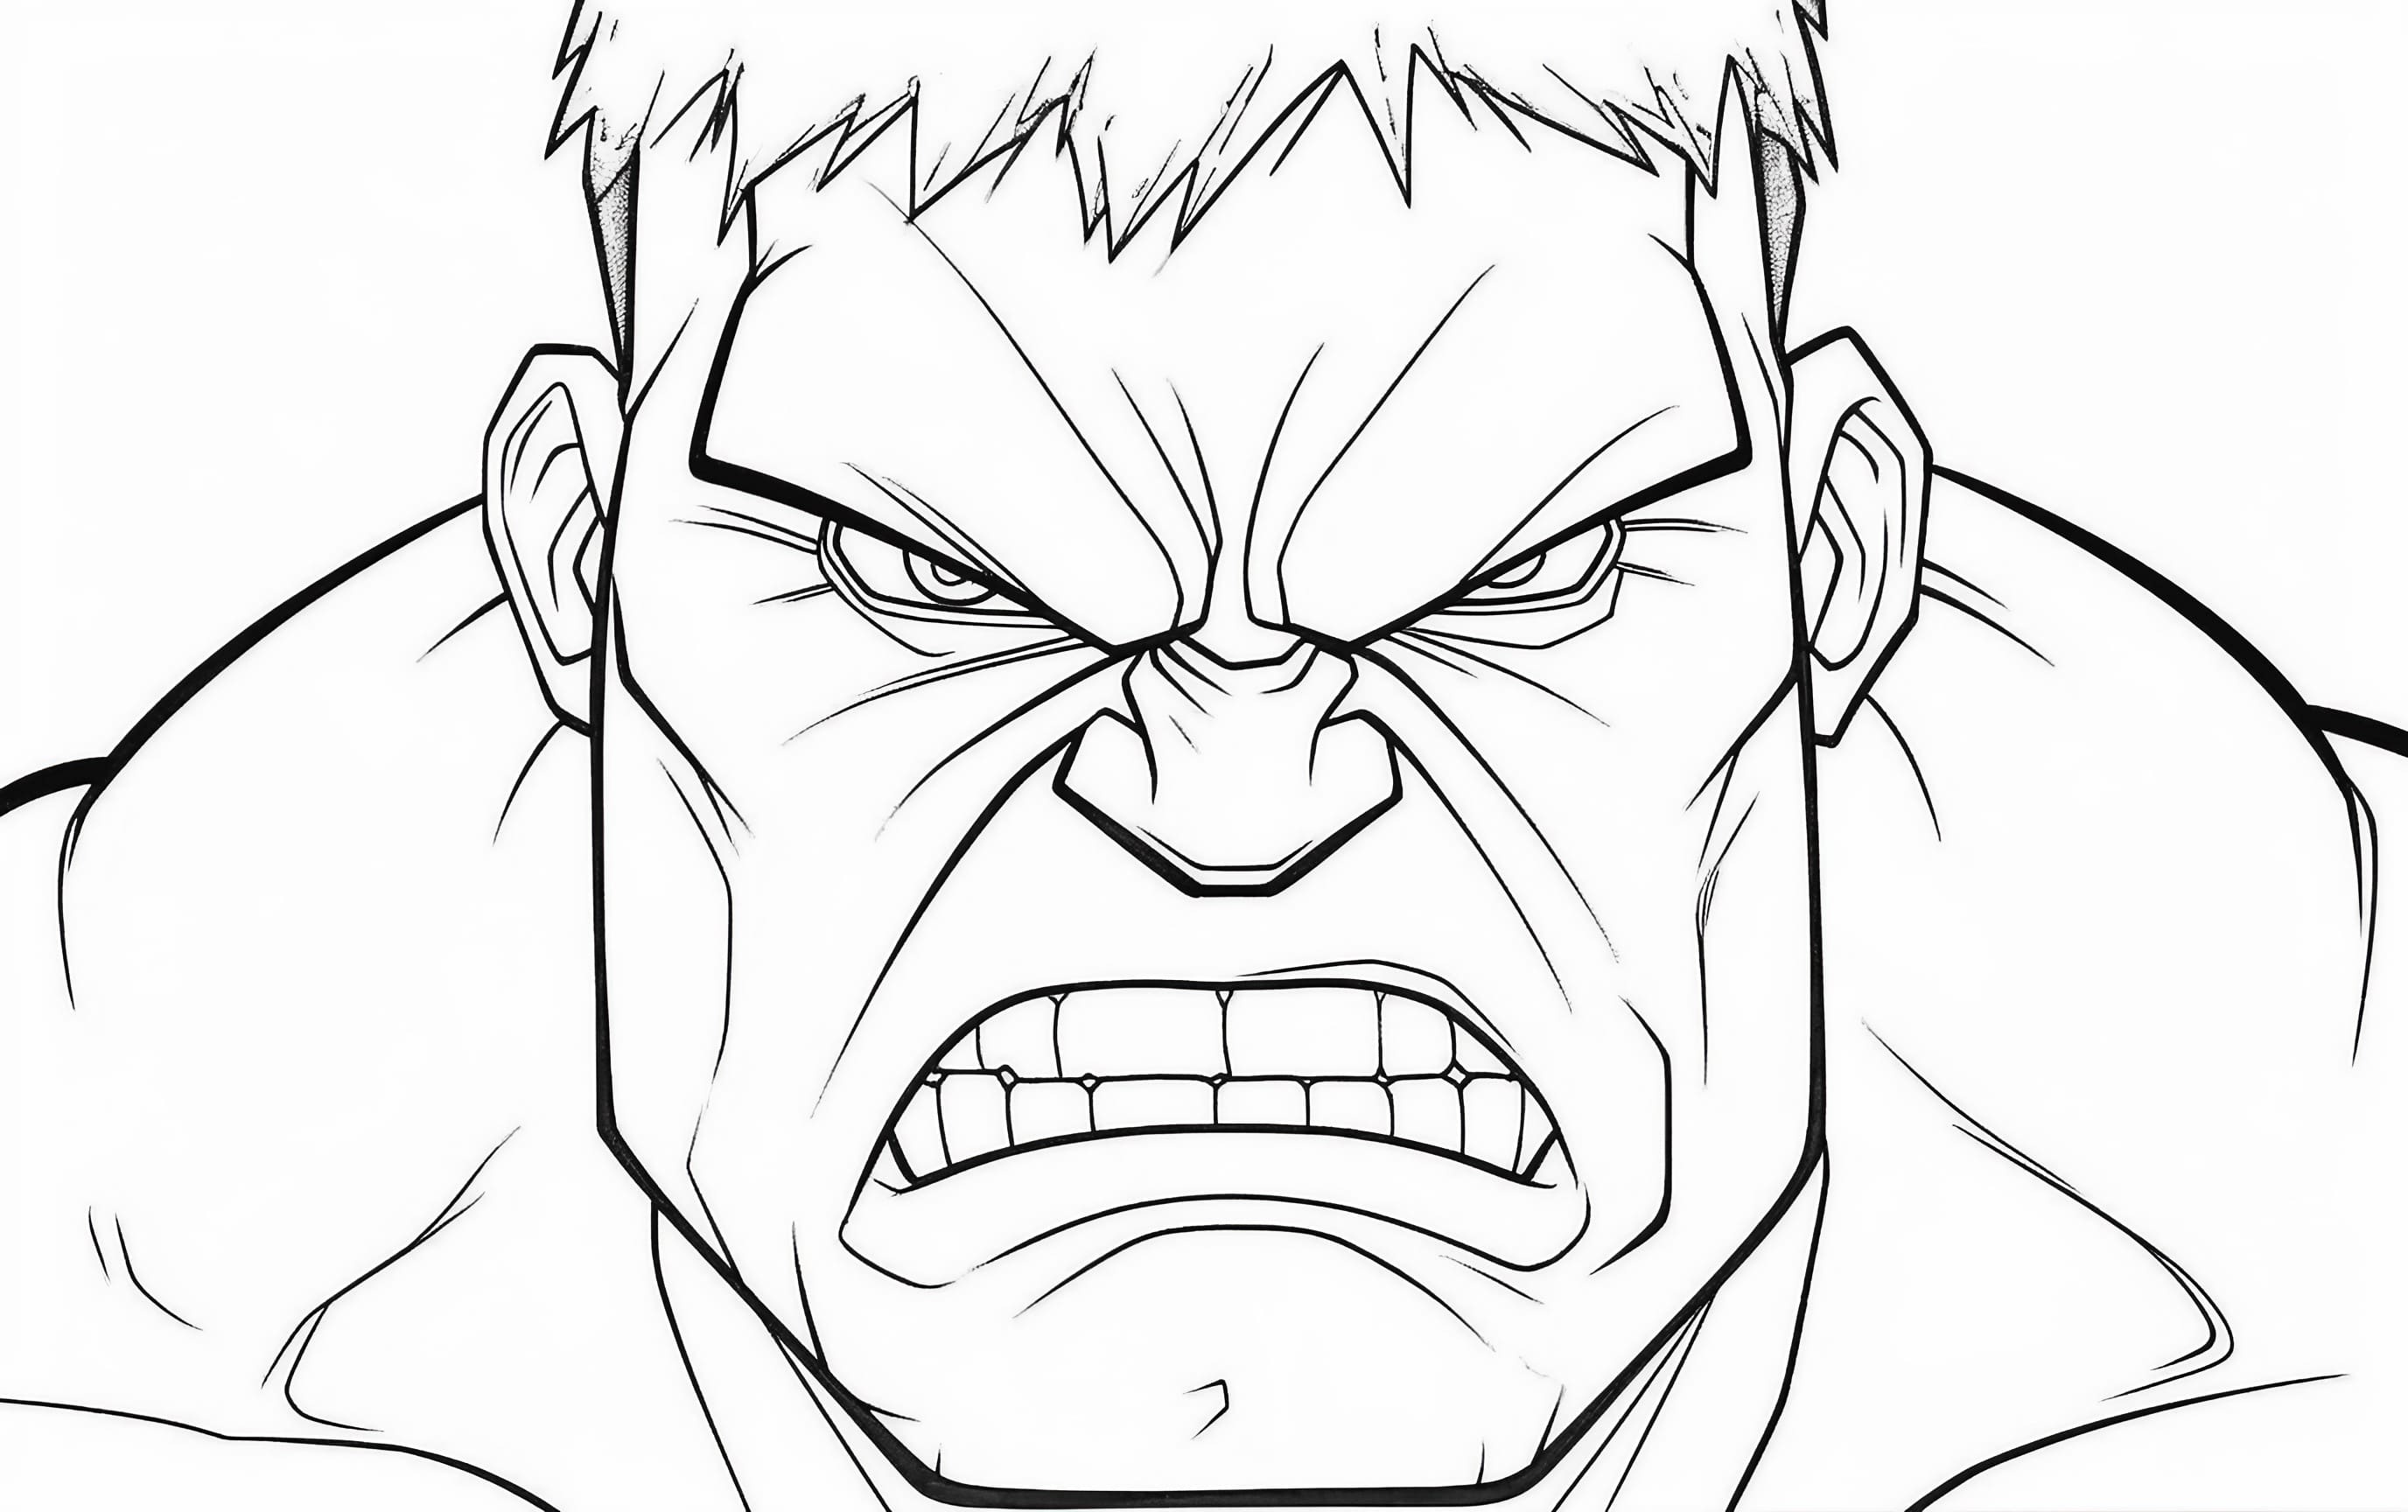 Hulk coloring pages for free printable